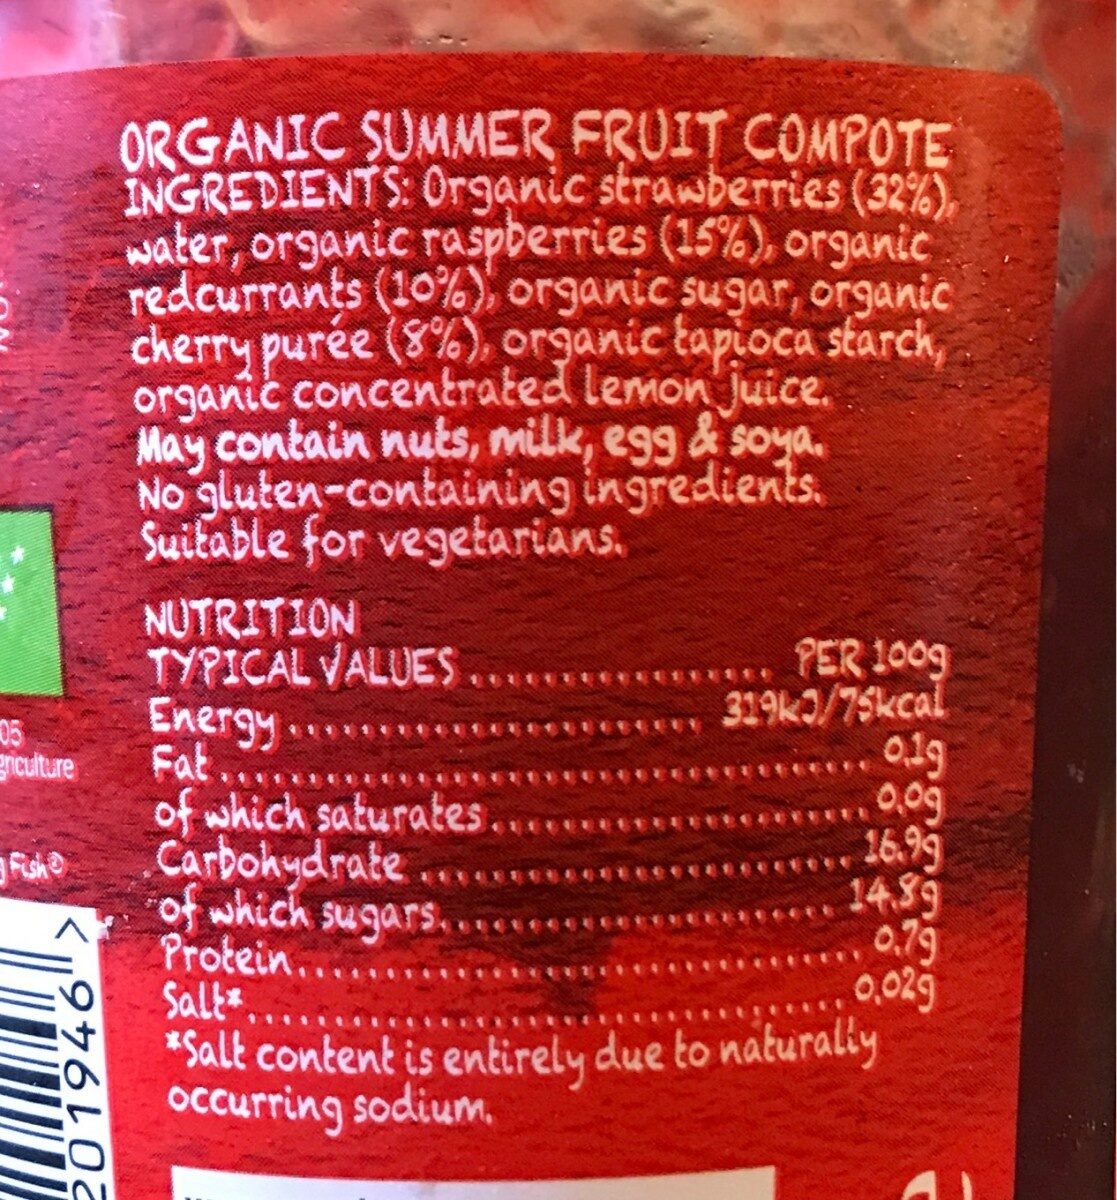 Summer Fruit Compote - Nutrition facts